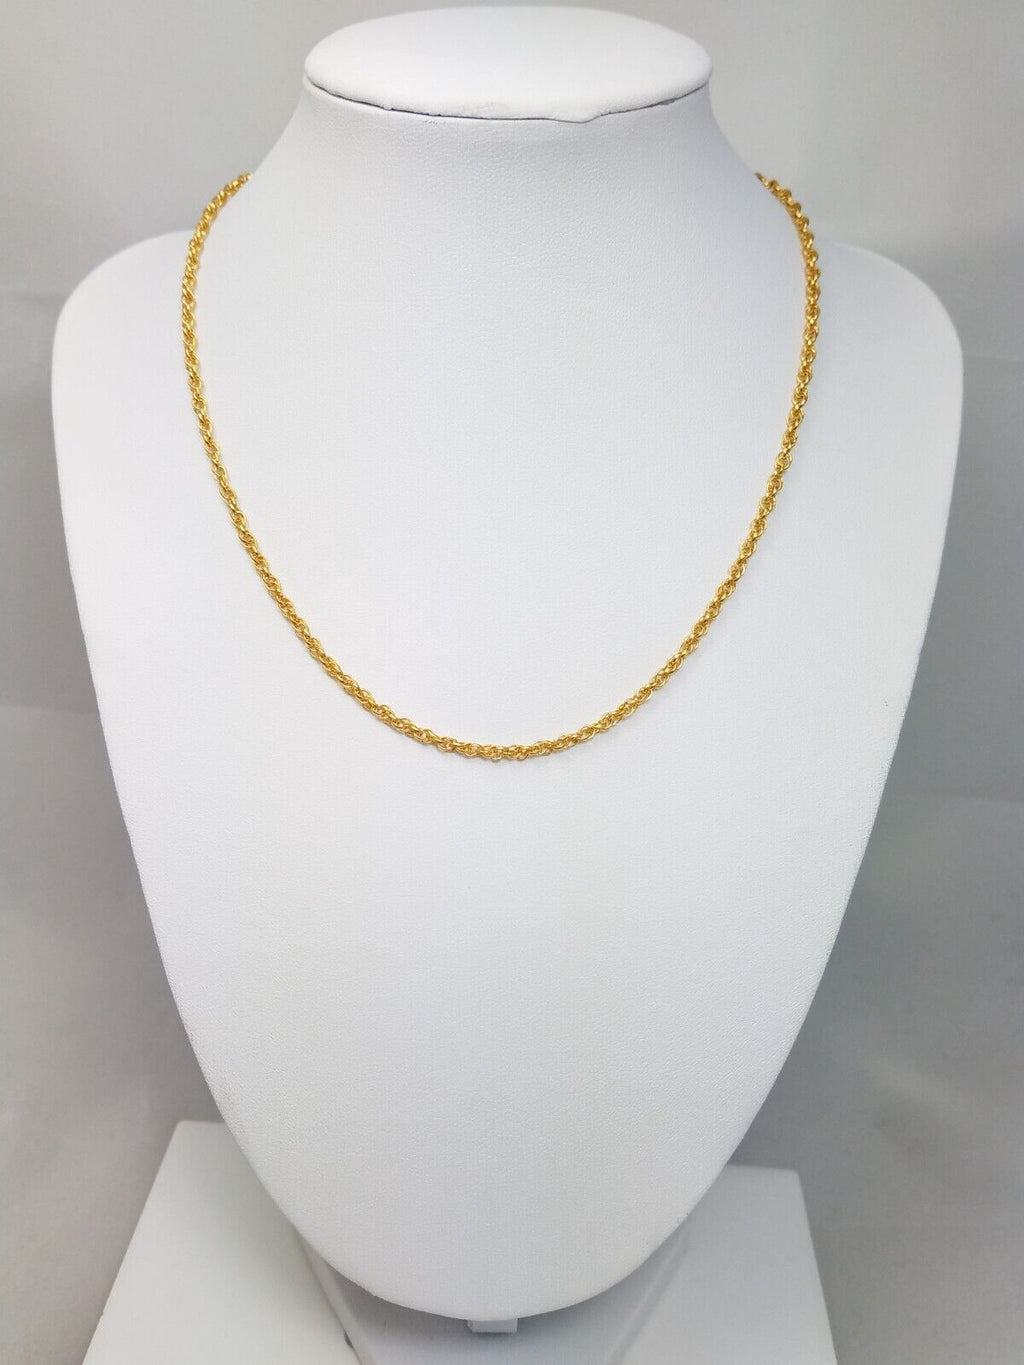 16" 24k Solid Yellow Gold Link Chain Necklace